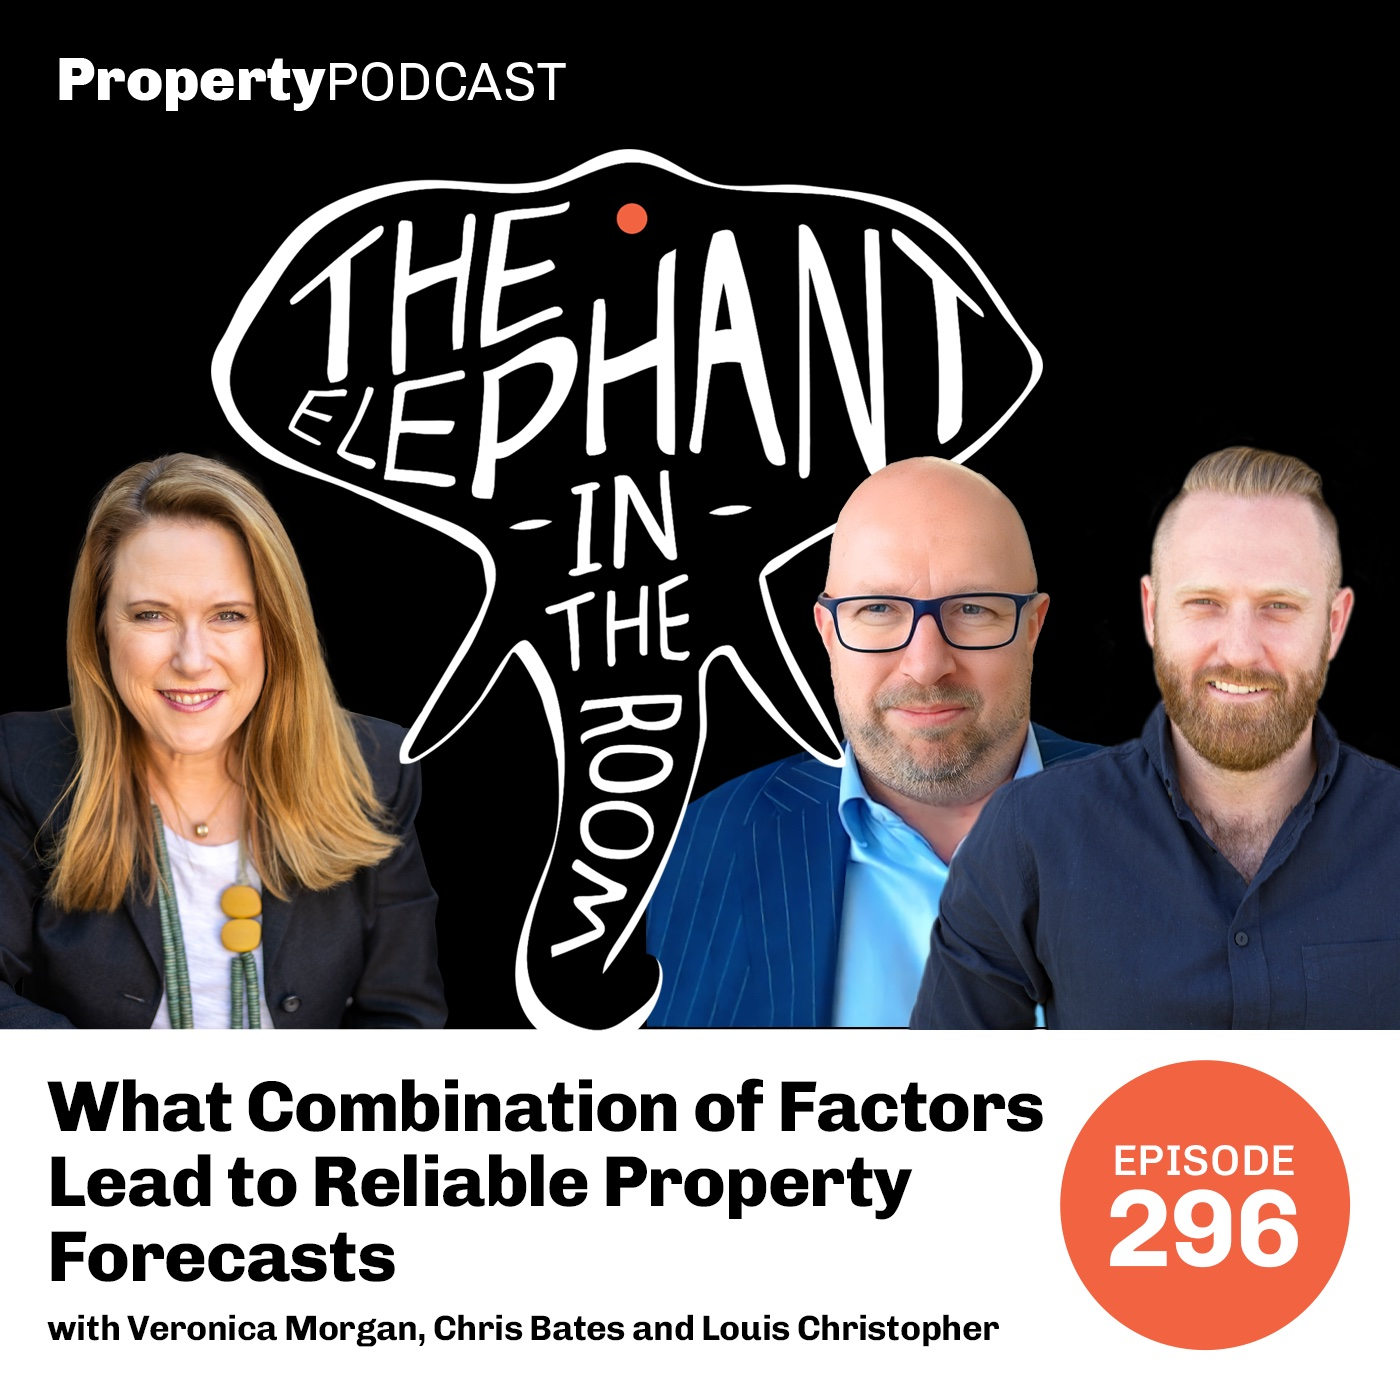 What Combination of Factors Leads to Reliable Property Price Forecasts?